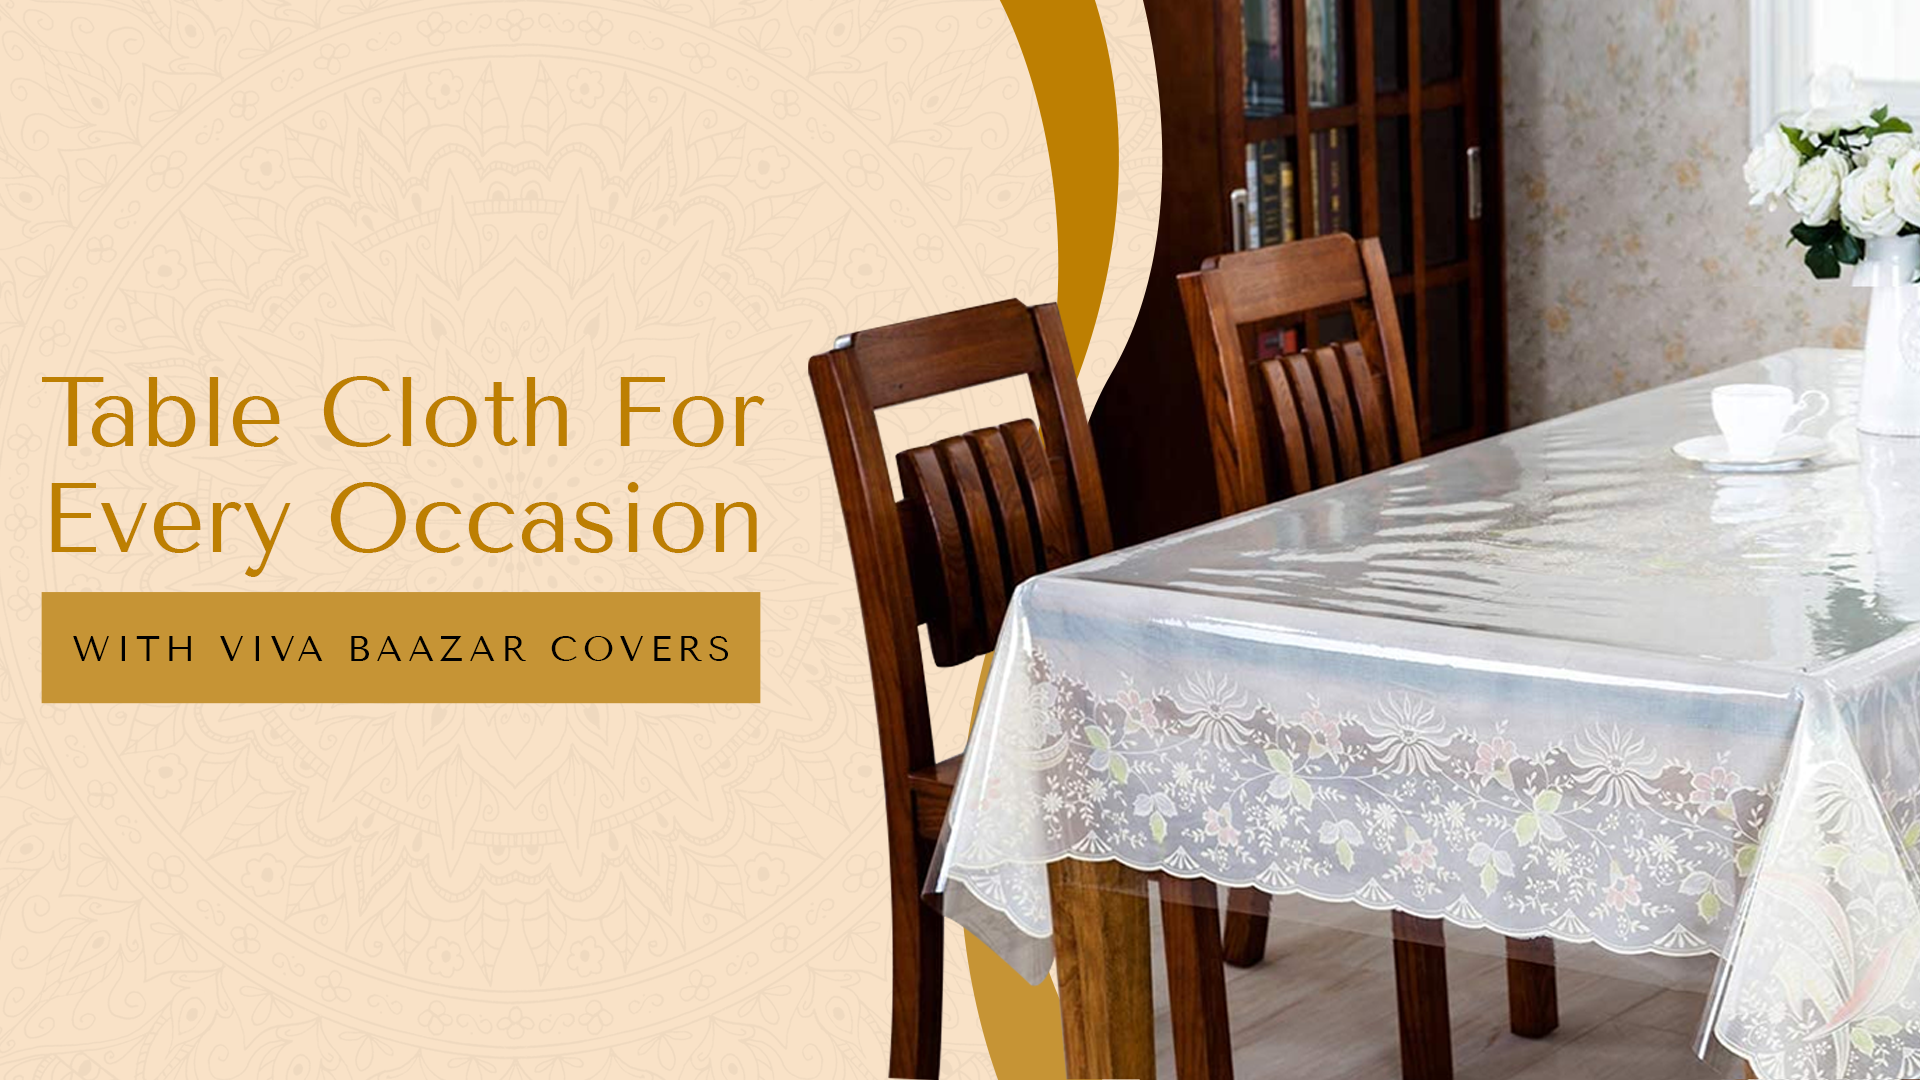 Table Cloth For Every Occasion Only From Viva Baazar